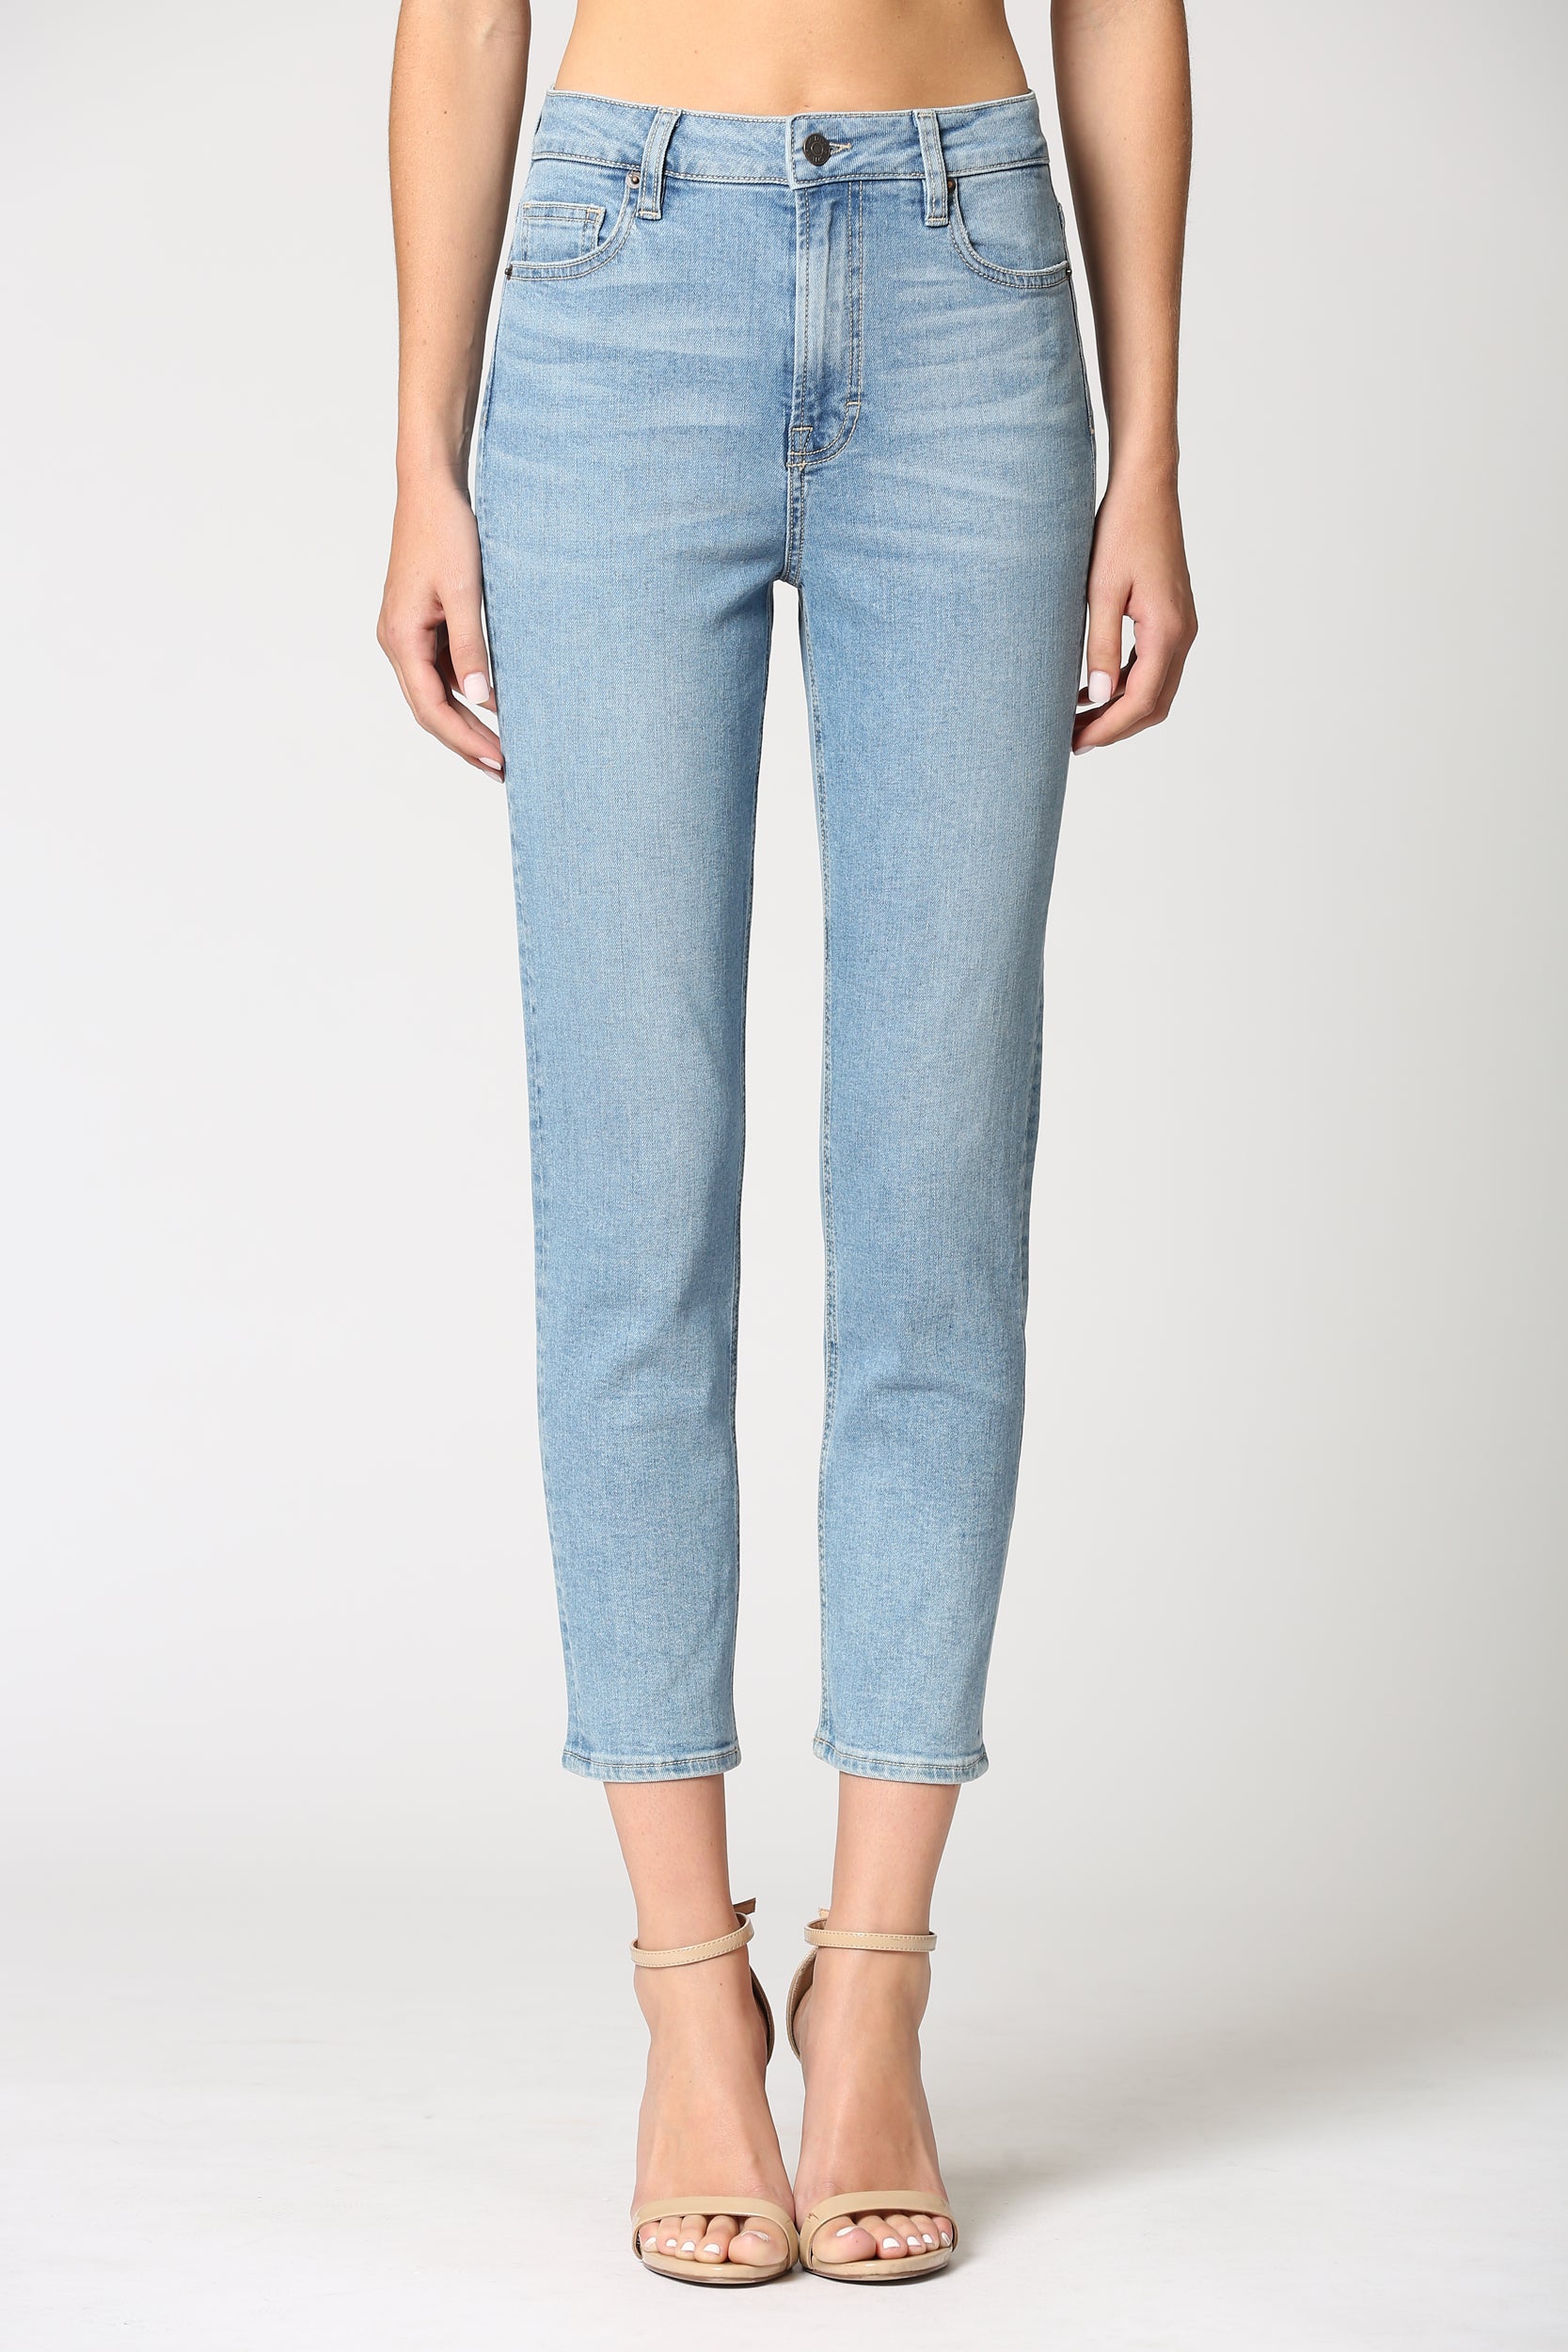 Harley High Rise Jeans - FINAL SALE